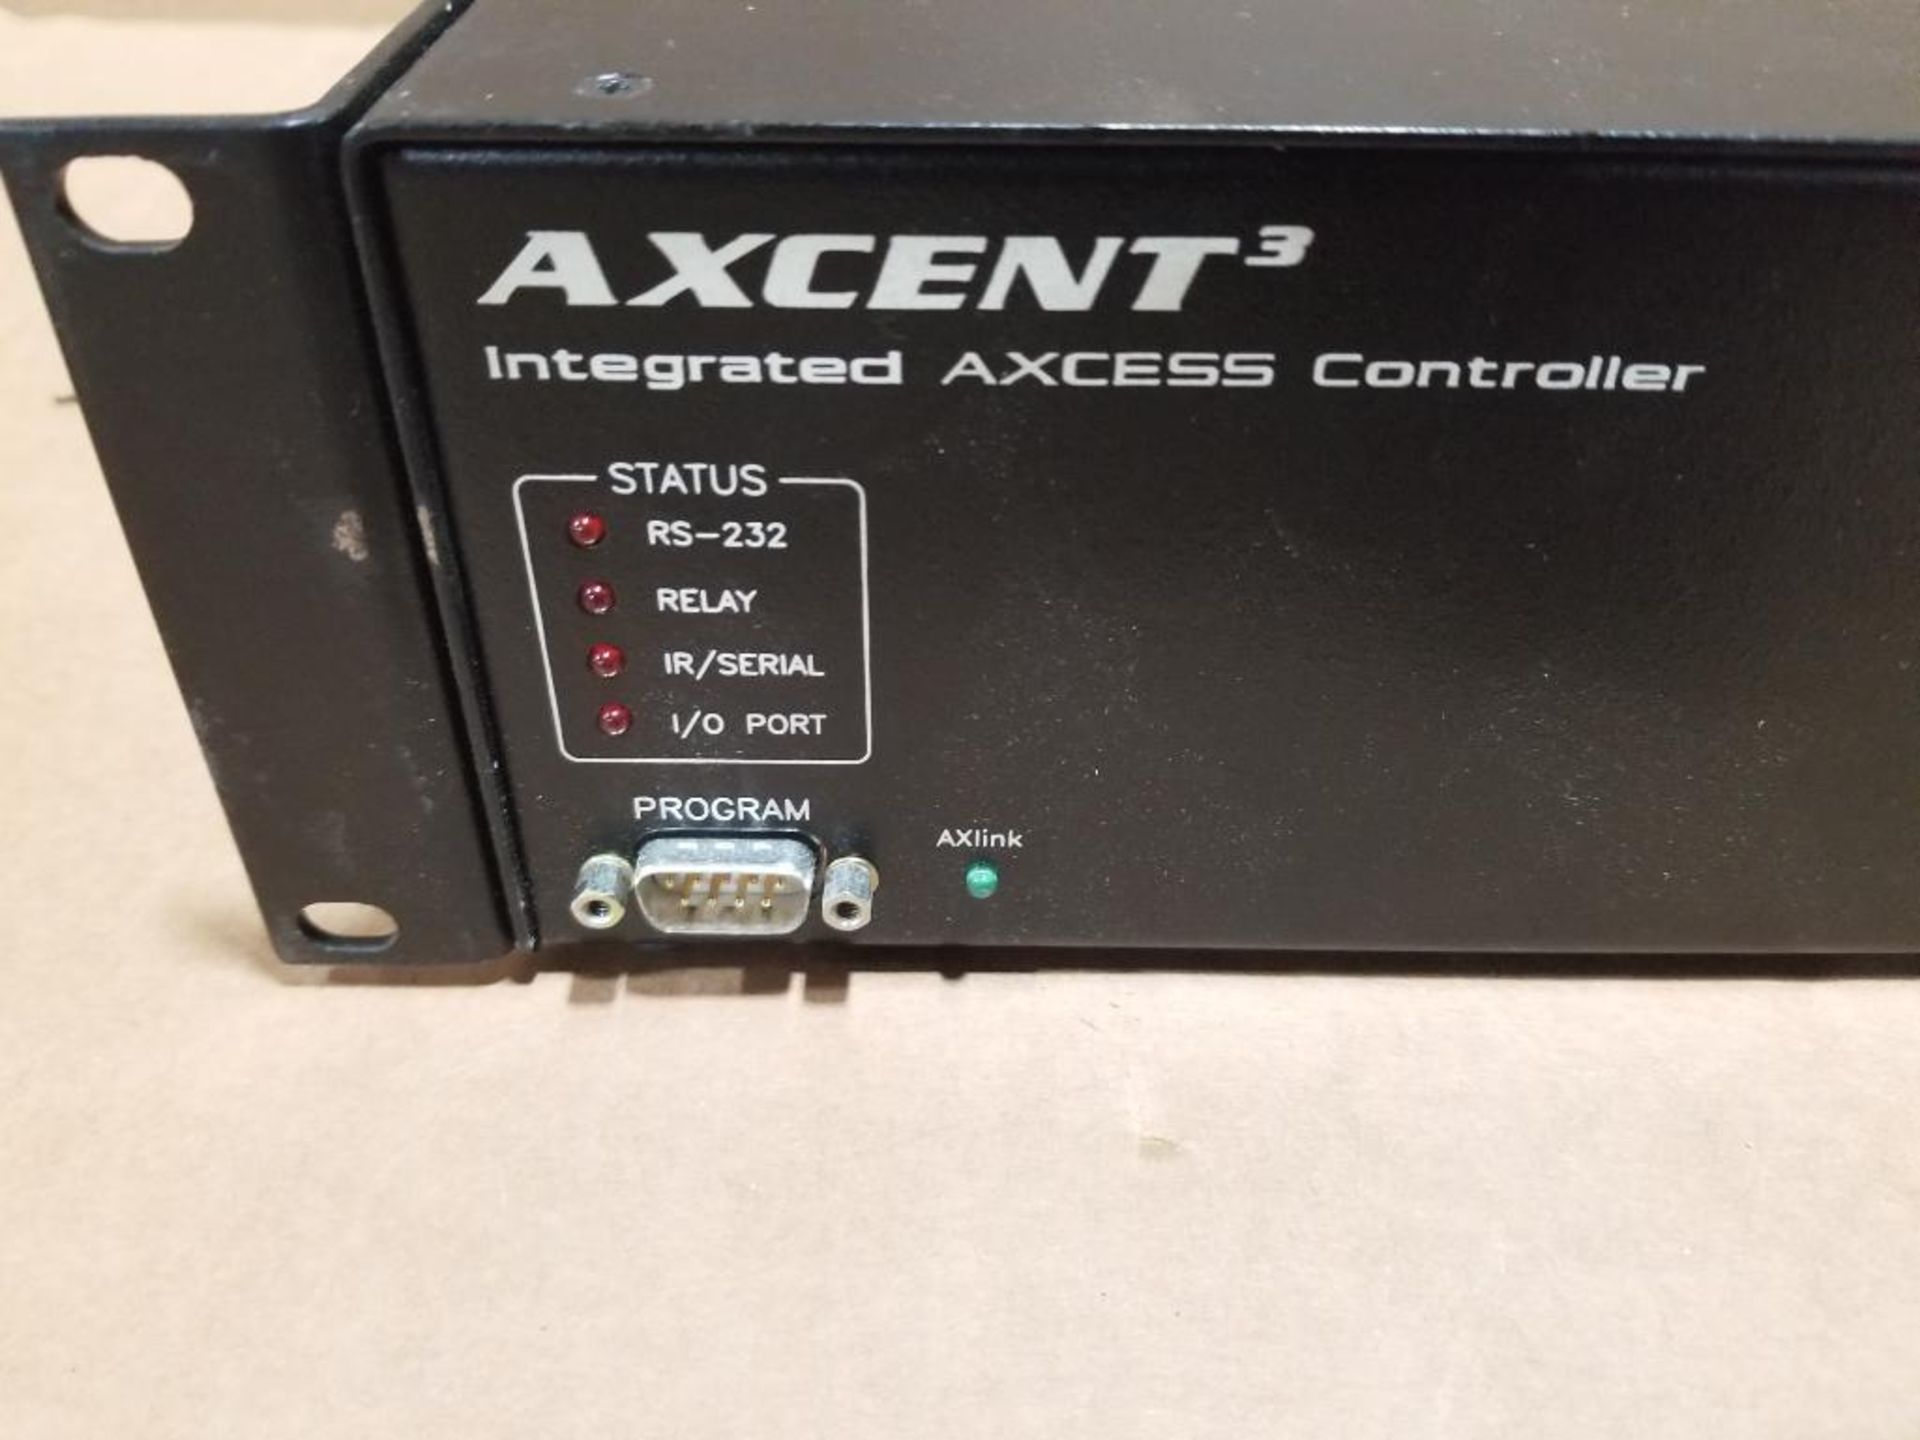 Axcent integrated access controller and Vorne Industries display. - Image 5 of 7